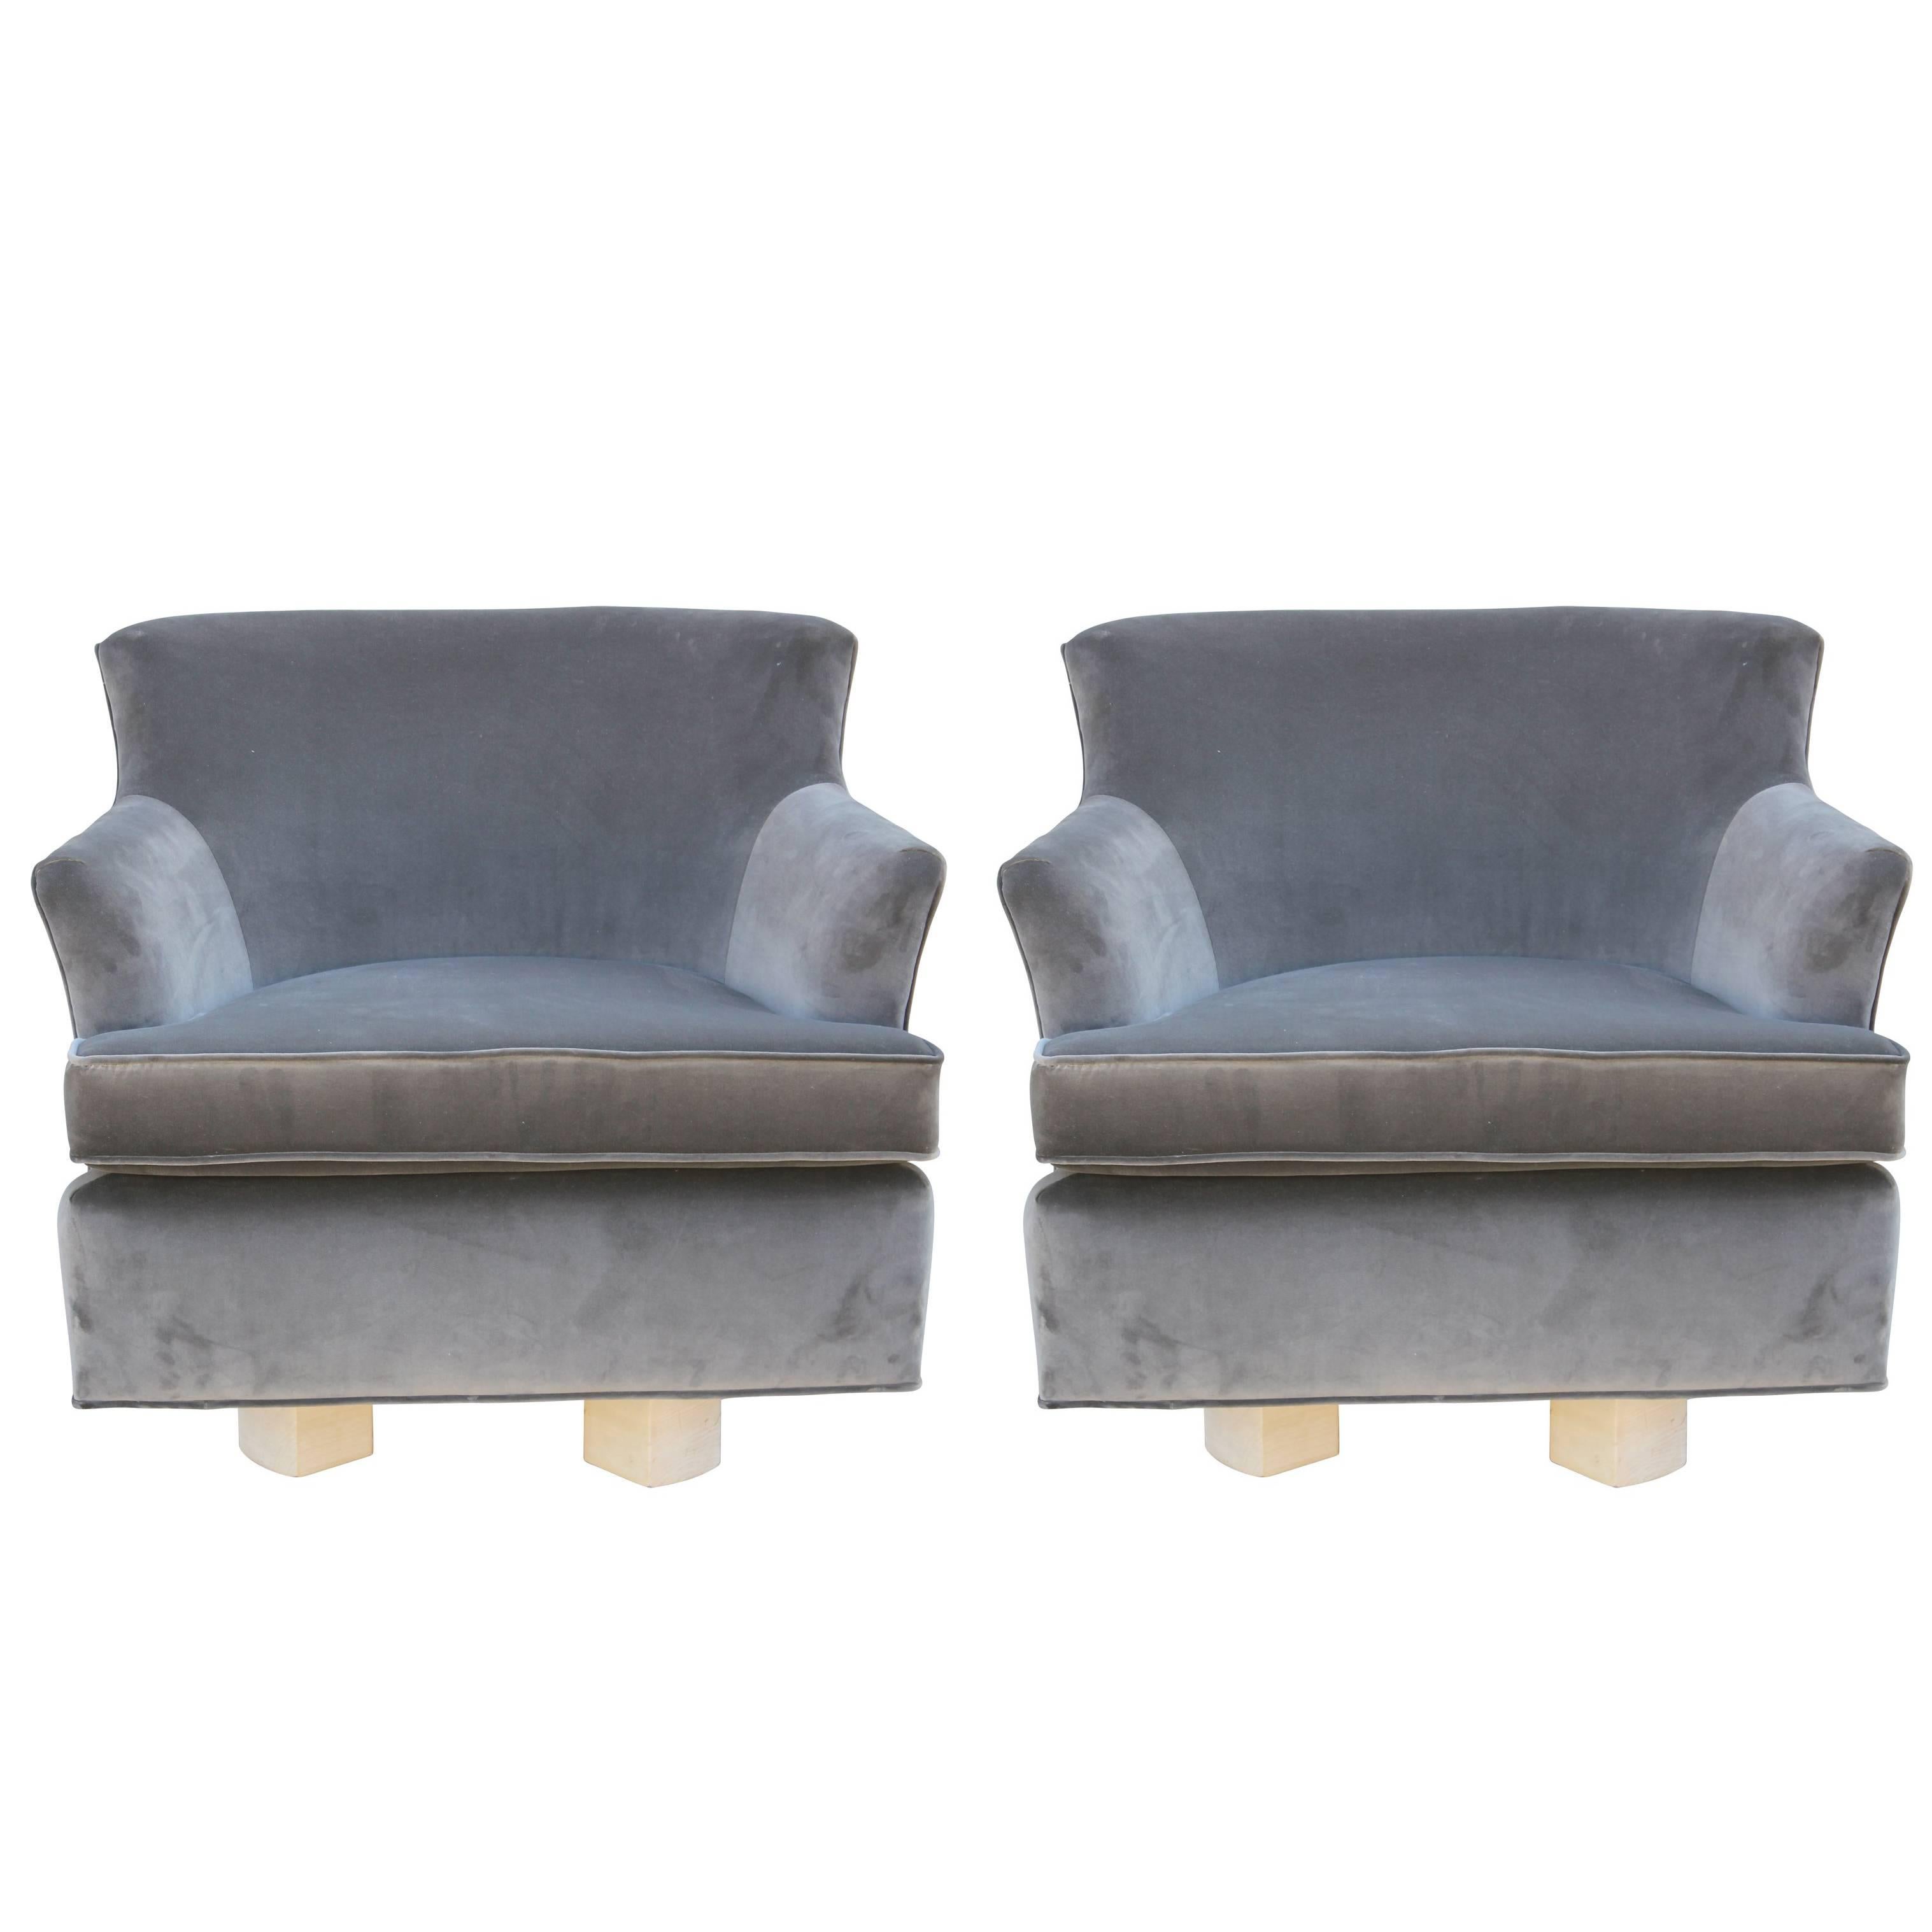 Pair of Modern Grey Velvet Swivel Lounge Chairs with Bleached Wood Base